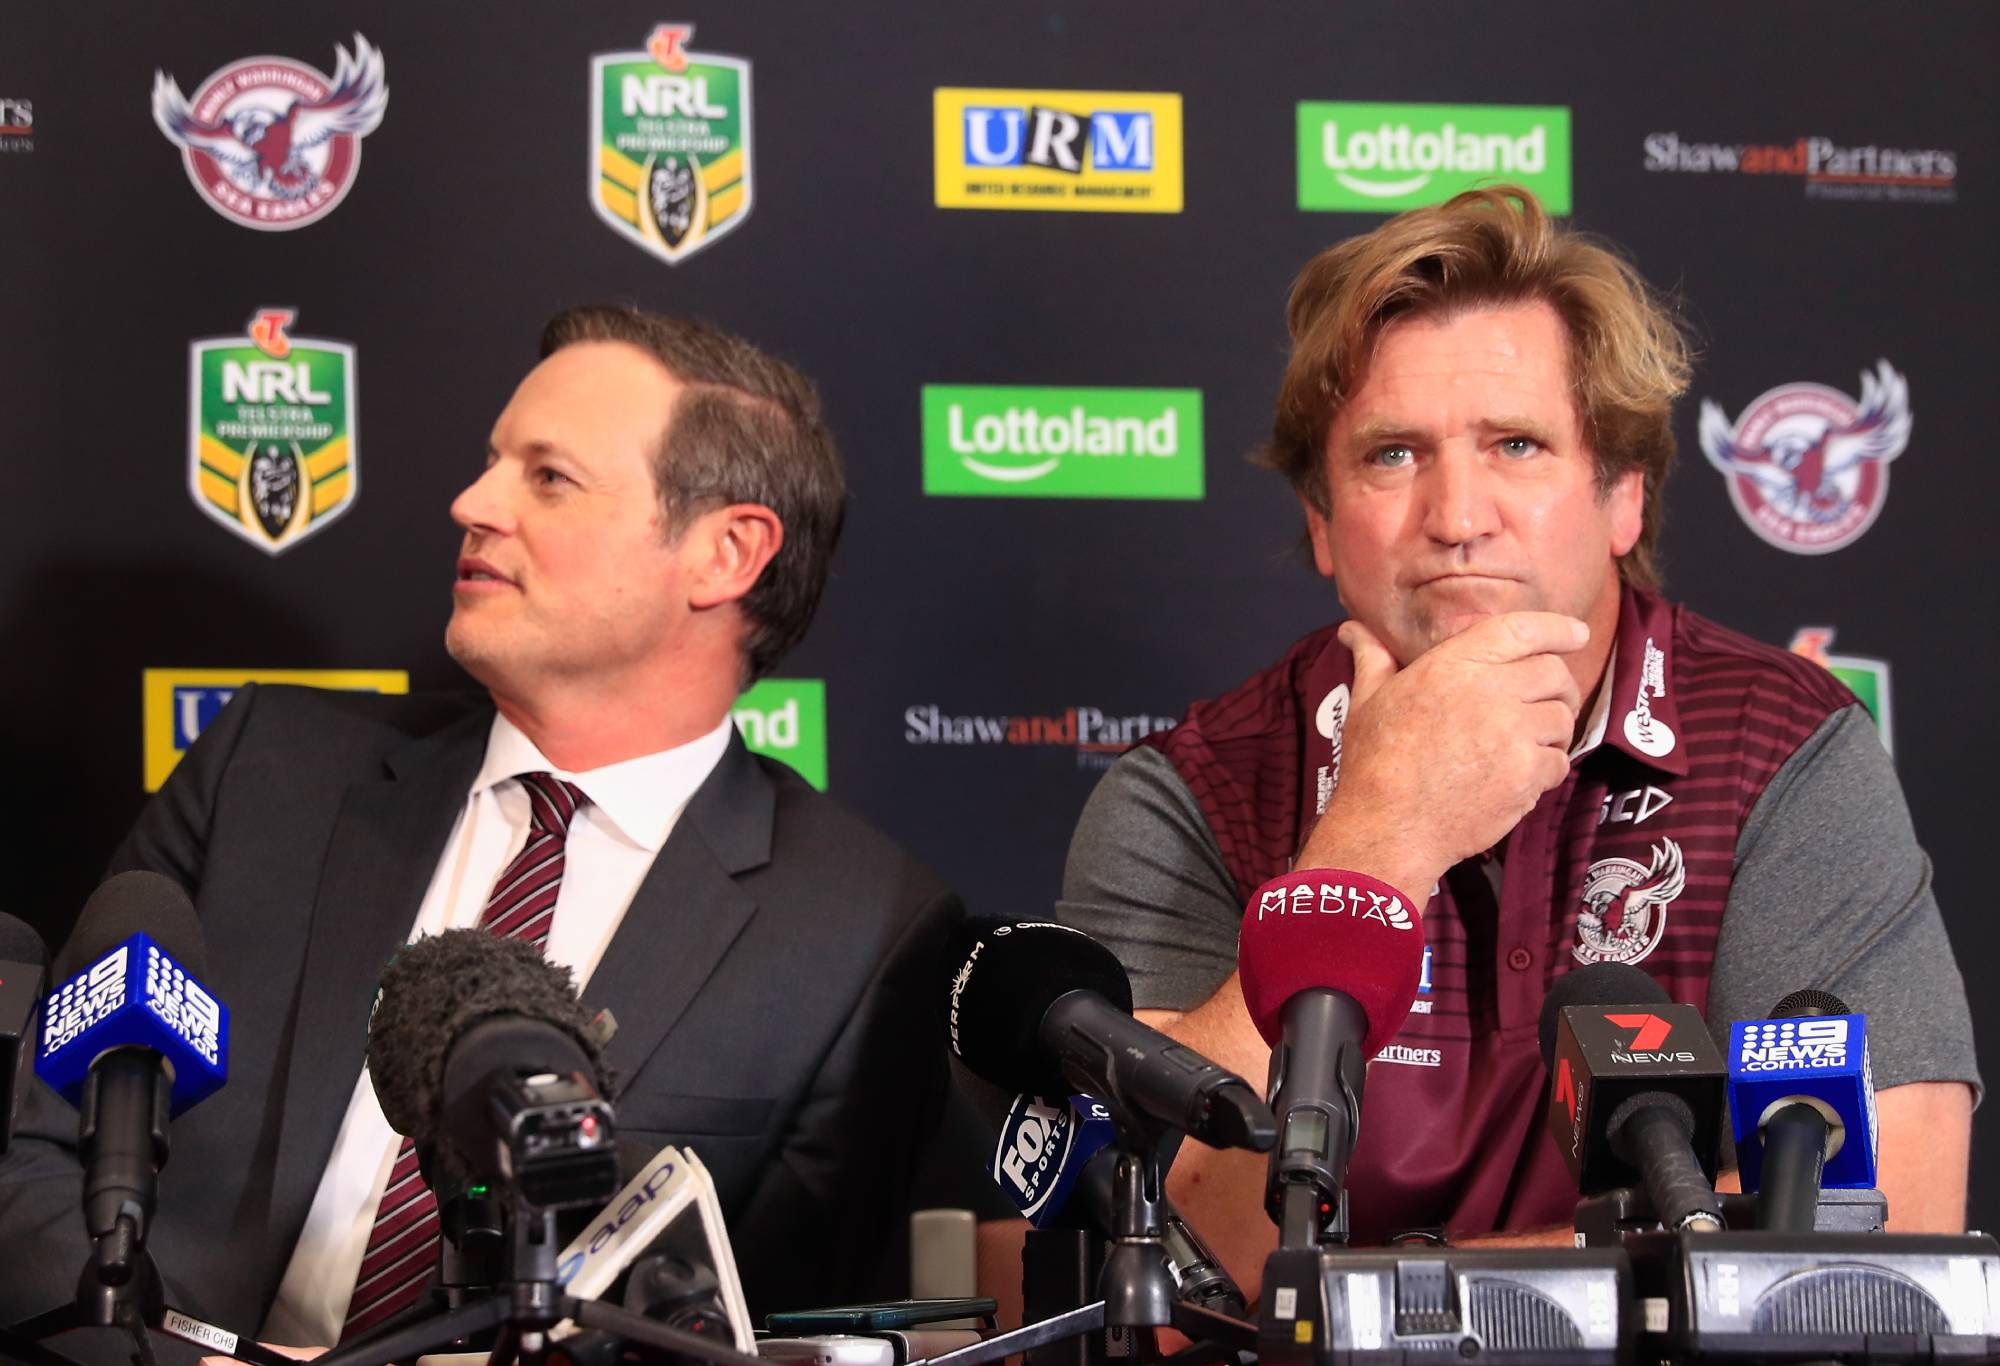 SYDNEY, AUSTRALIA - OCTOBER 22:  Chairman Scott Penn and new Manly Coach Des Hasler at a Manly Sea Eagles NRL press conference at Sydney Academy of Sport, Narrabeen on October 22, 2018 in Sydney, Australia.  (Photo by Mark Evans/Getty Images)